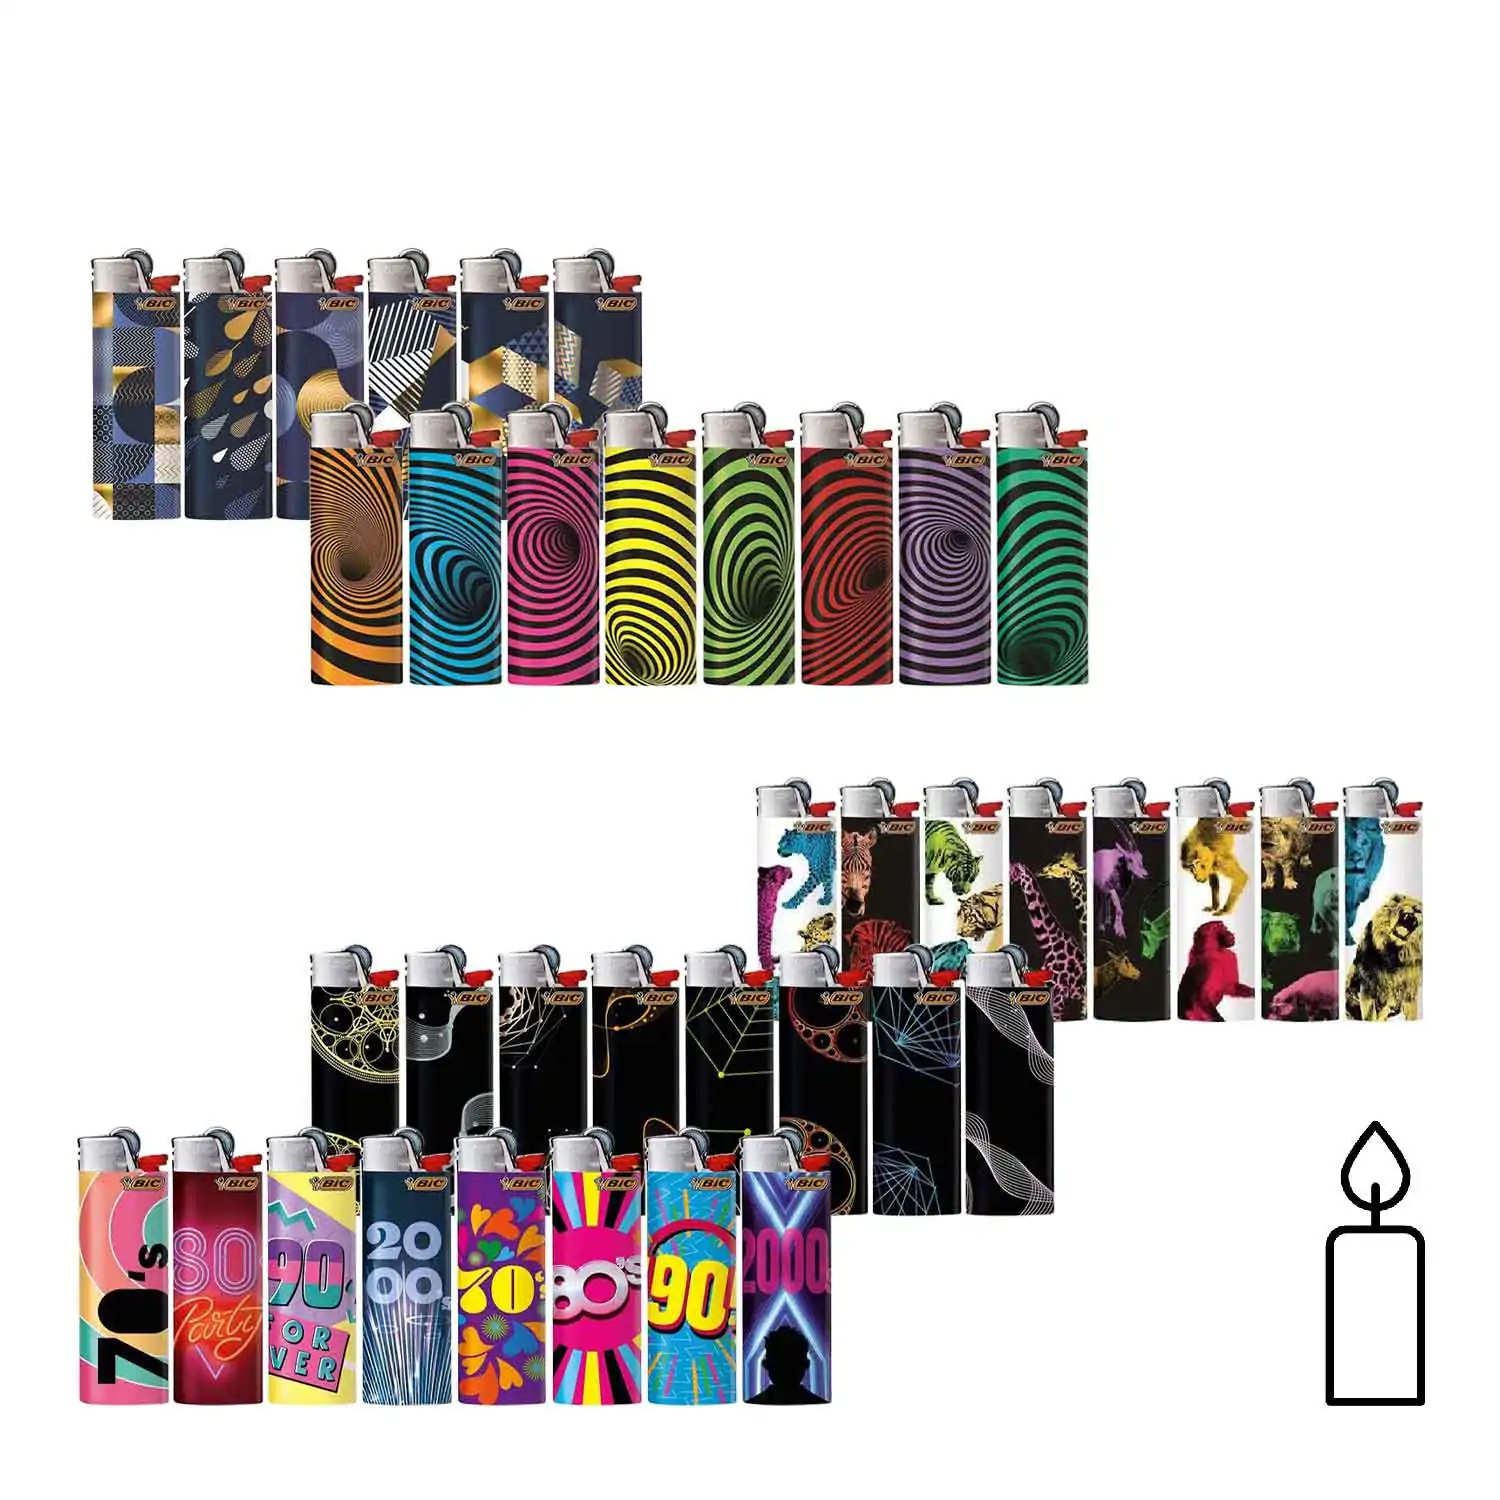 Bic mini lighter decorated - Buy at Real Tobacco